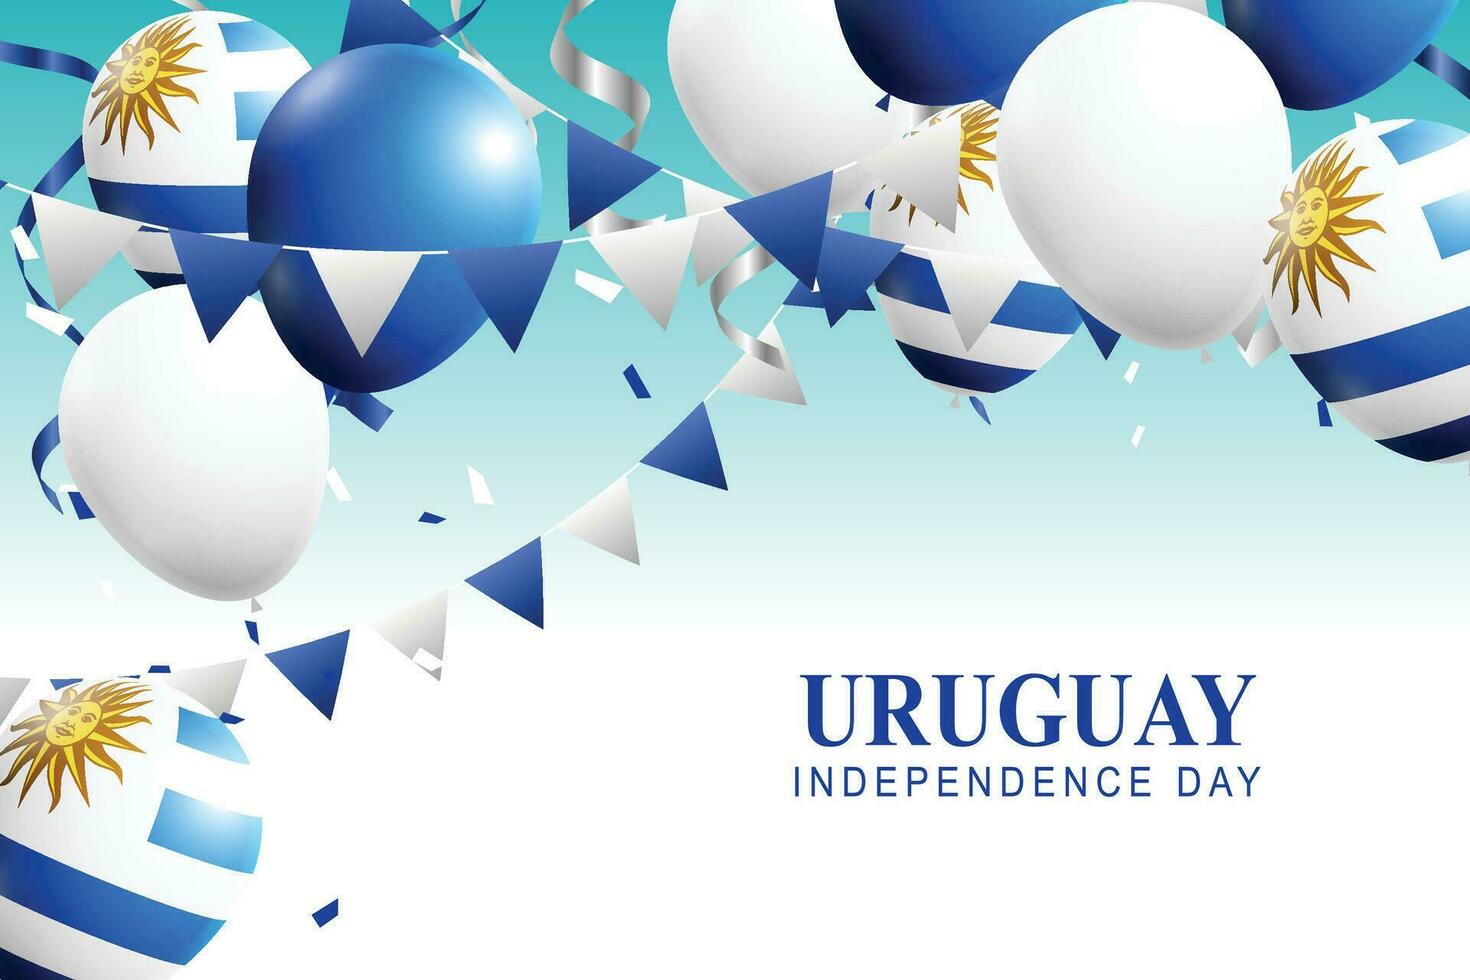 Uruguay Independence Day background. vector